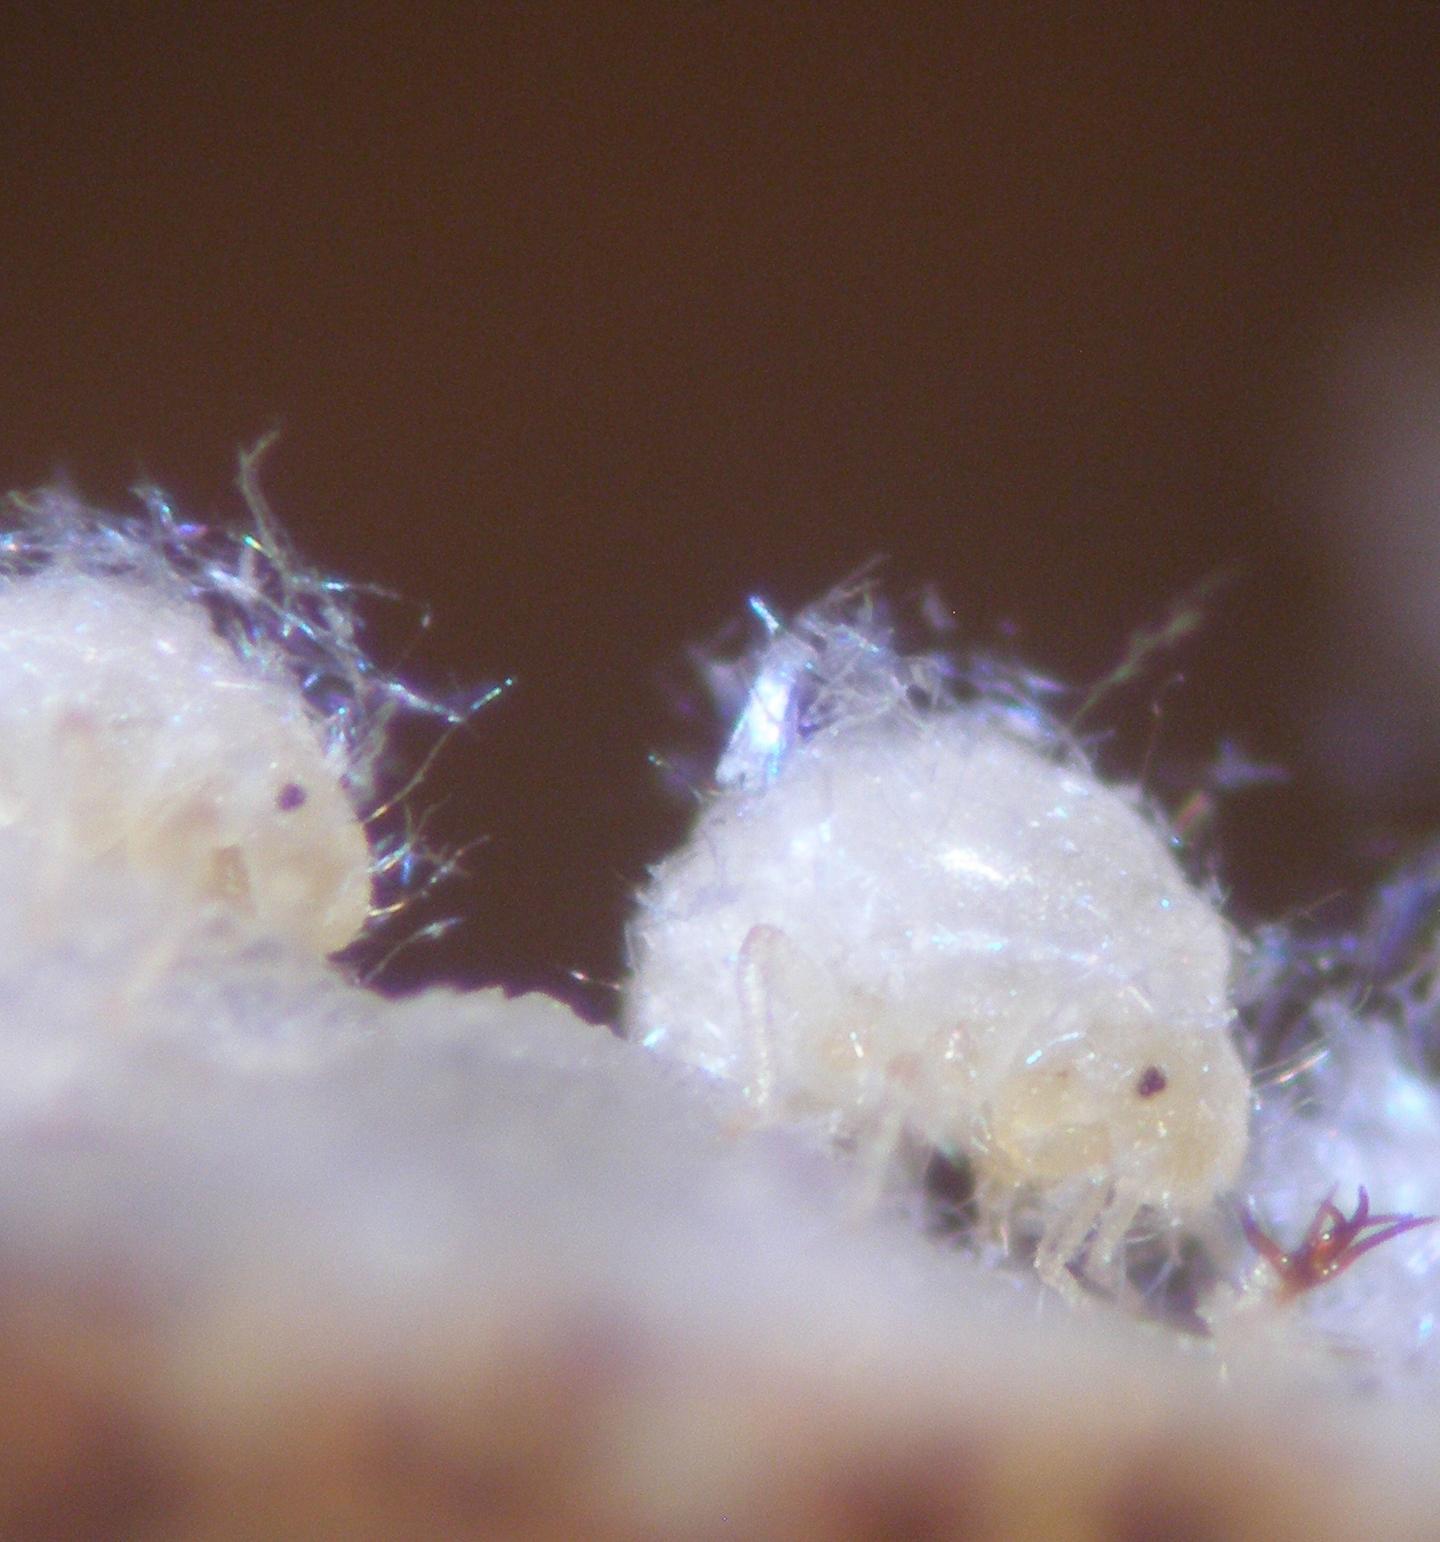 Soldier nymphs of Nipponaphis monzeni repairing a gall breach by discharging coagulating body fluid.